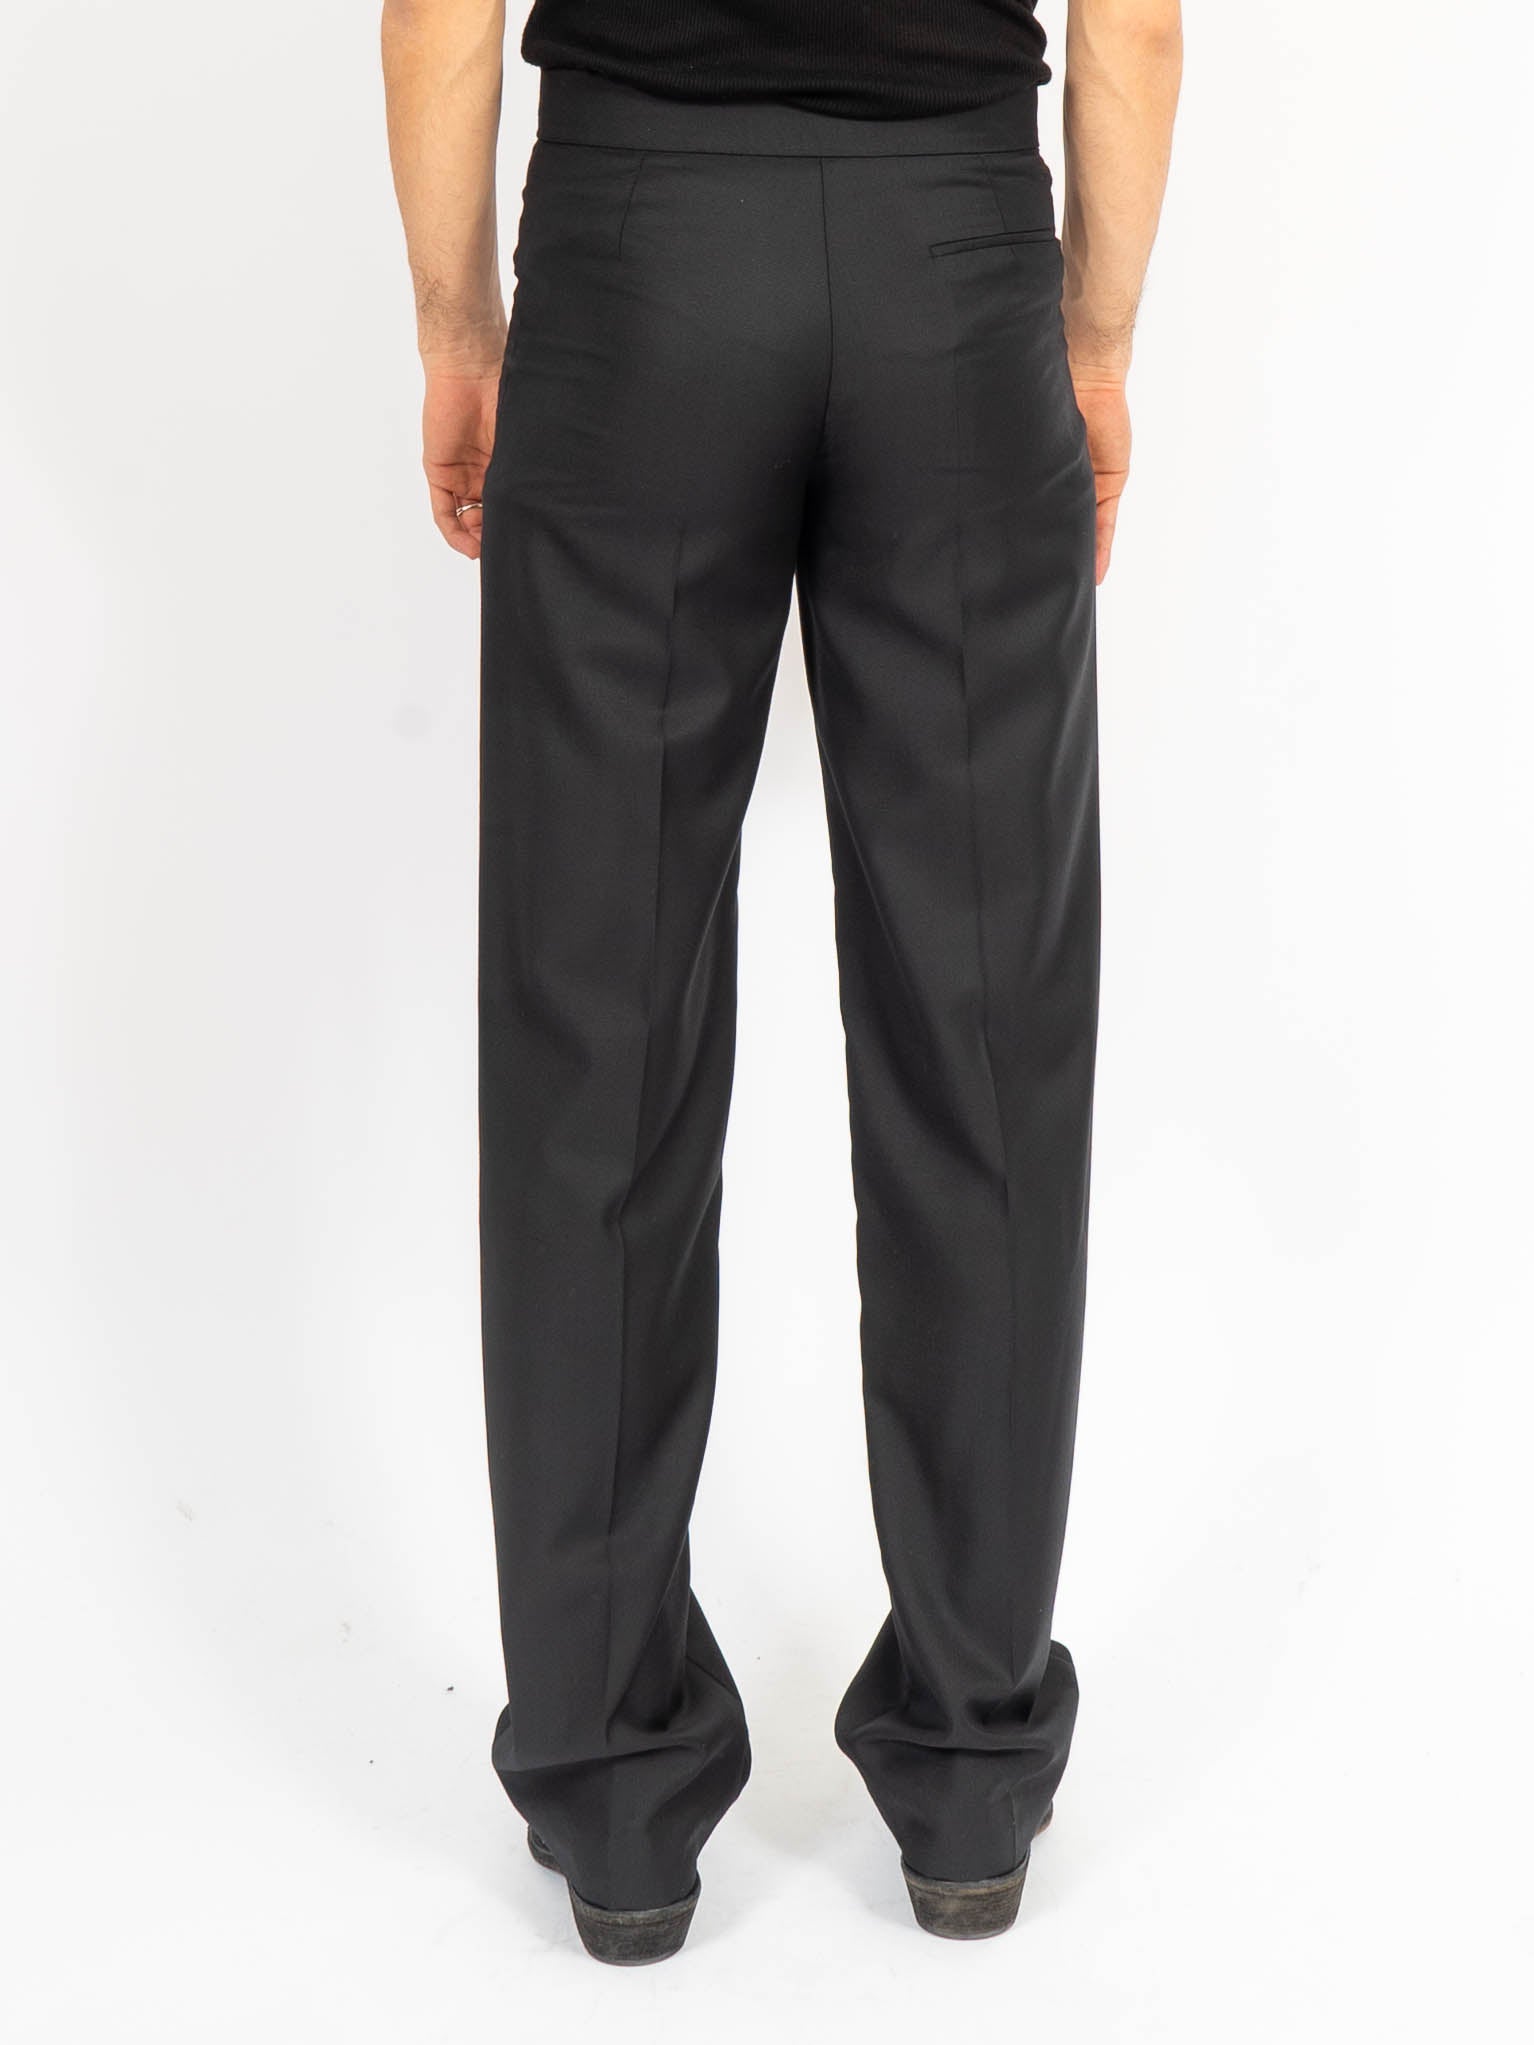 FW06 Flared Trousers Black Viscose